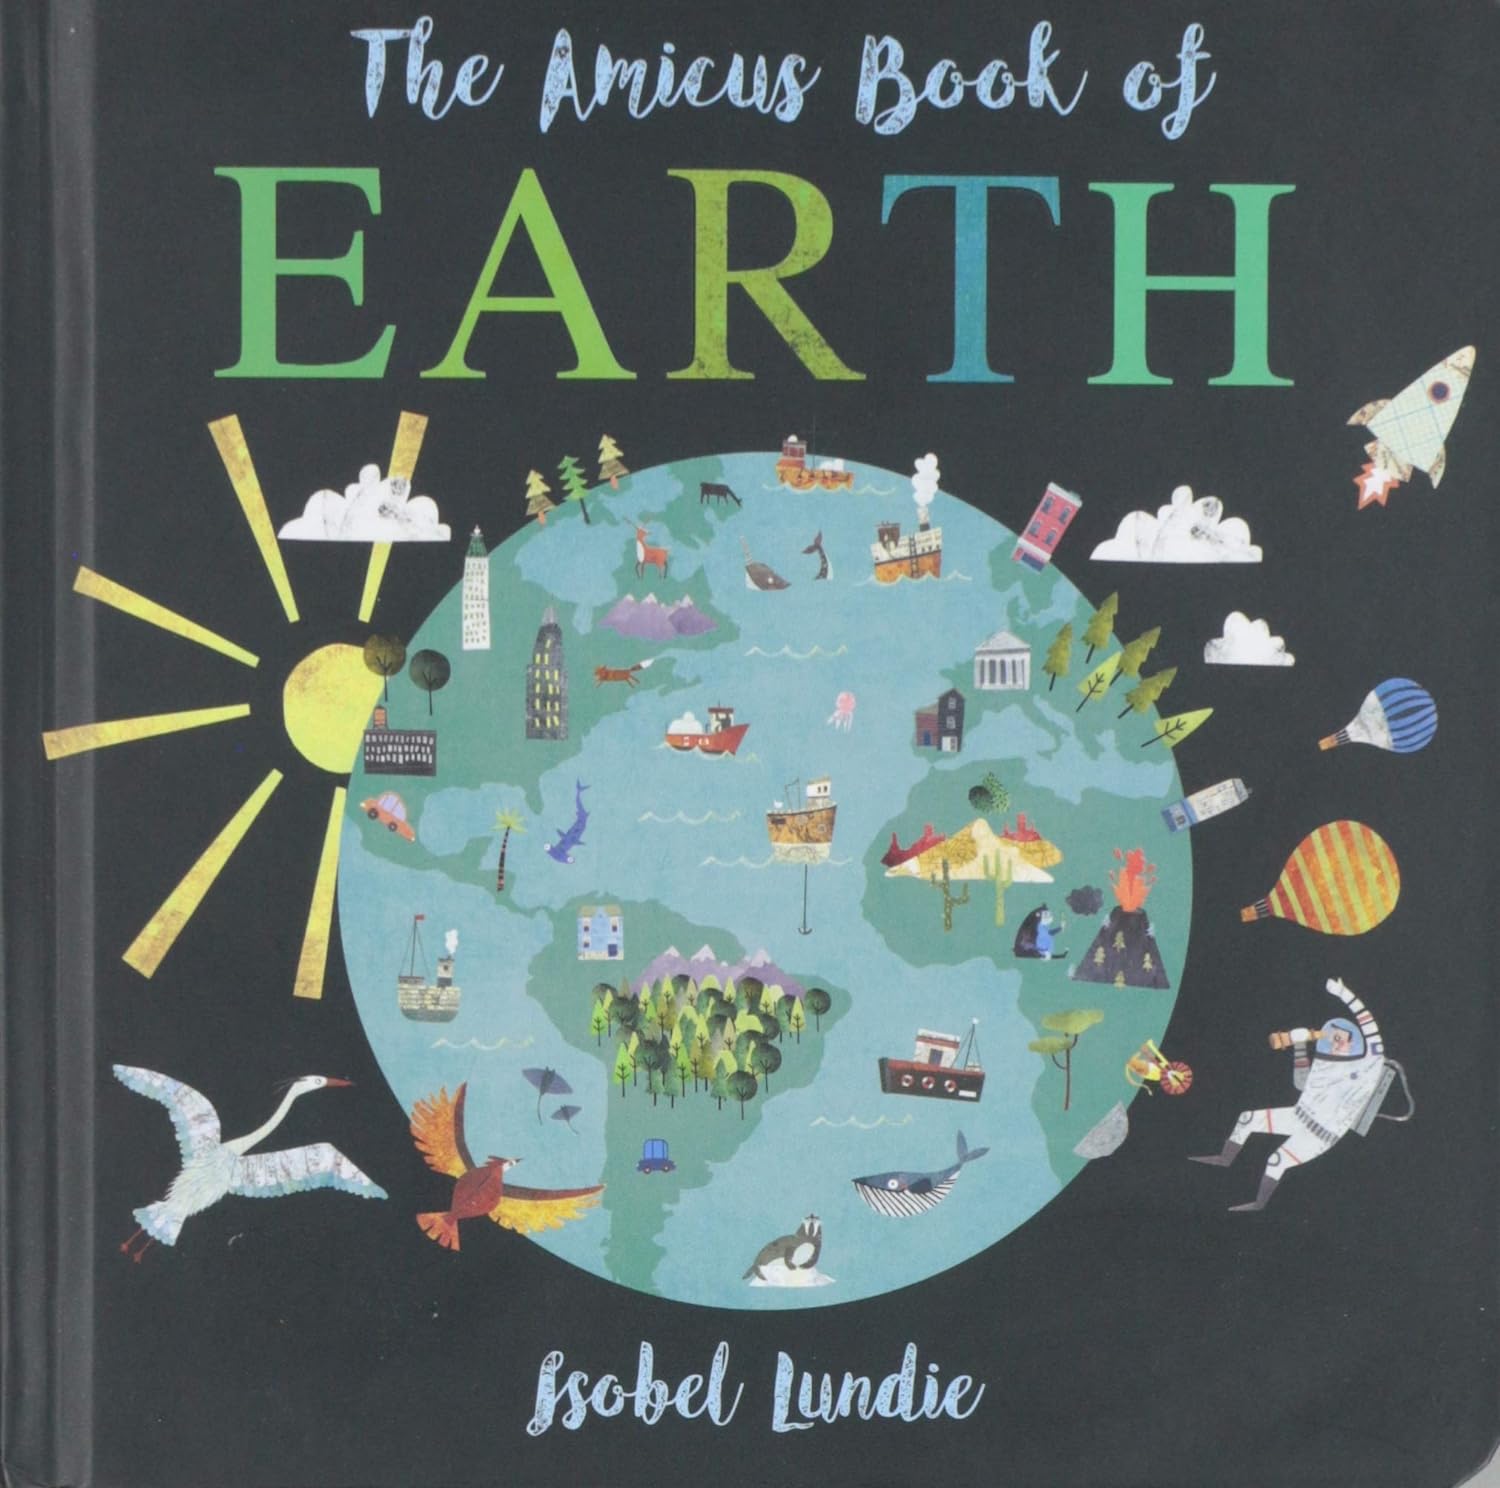 Striking collage-style art made from maps and marbled papers illustrates the beauty and variety of places on Earth in this sturdy board book for toddlers.